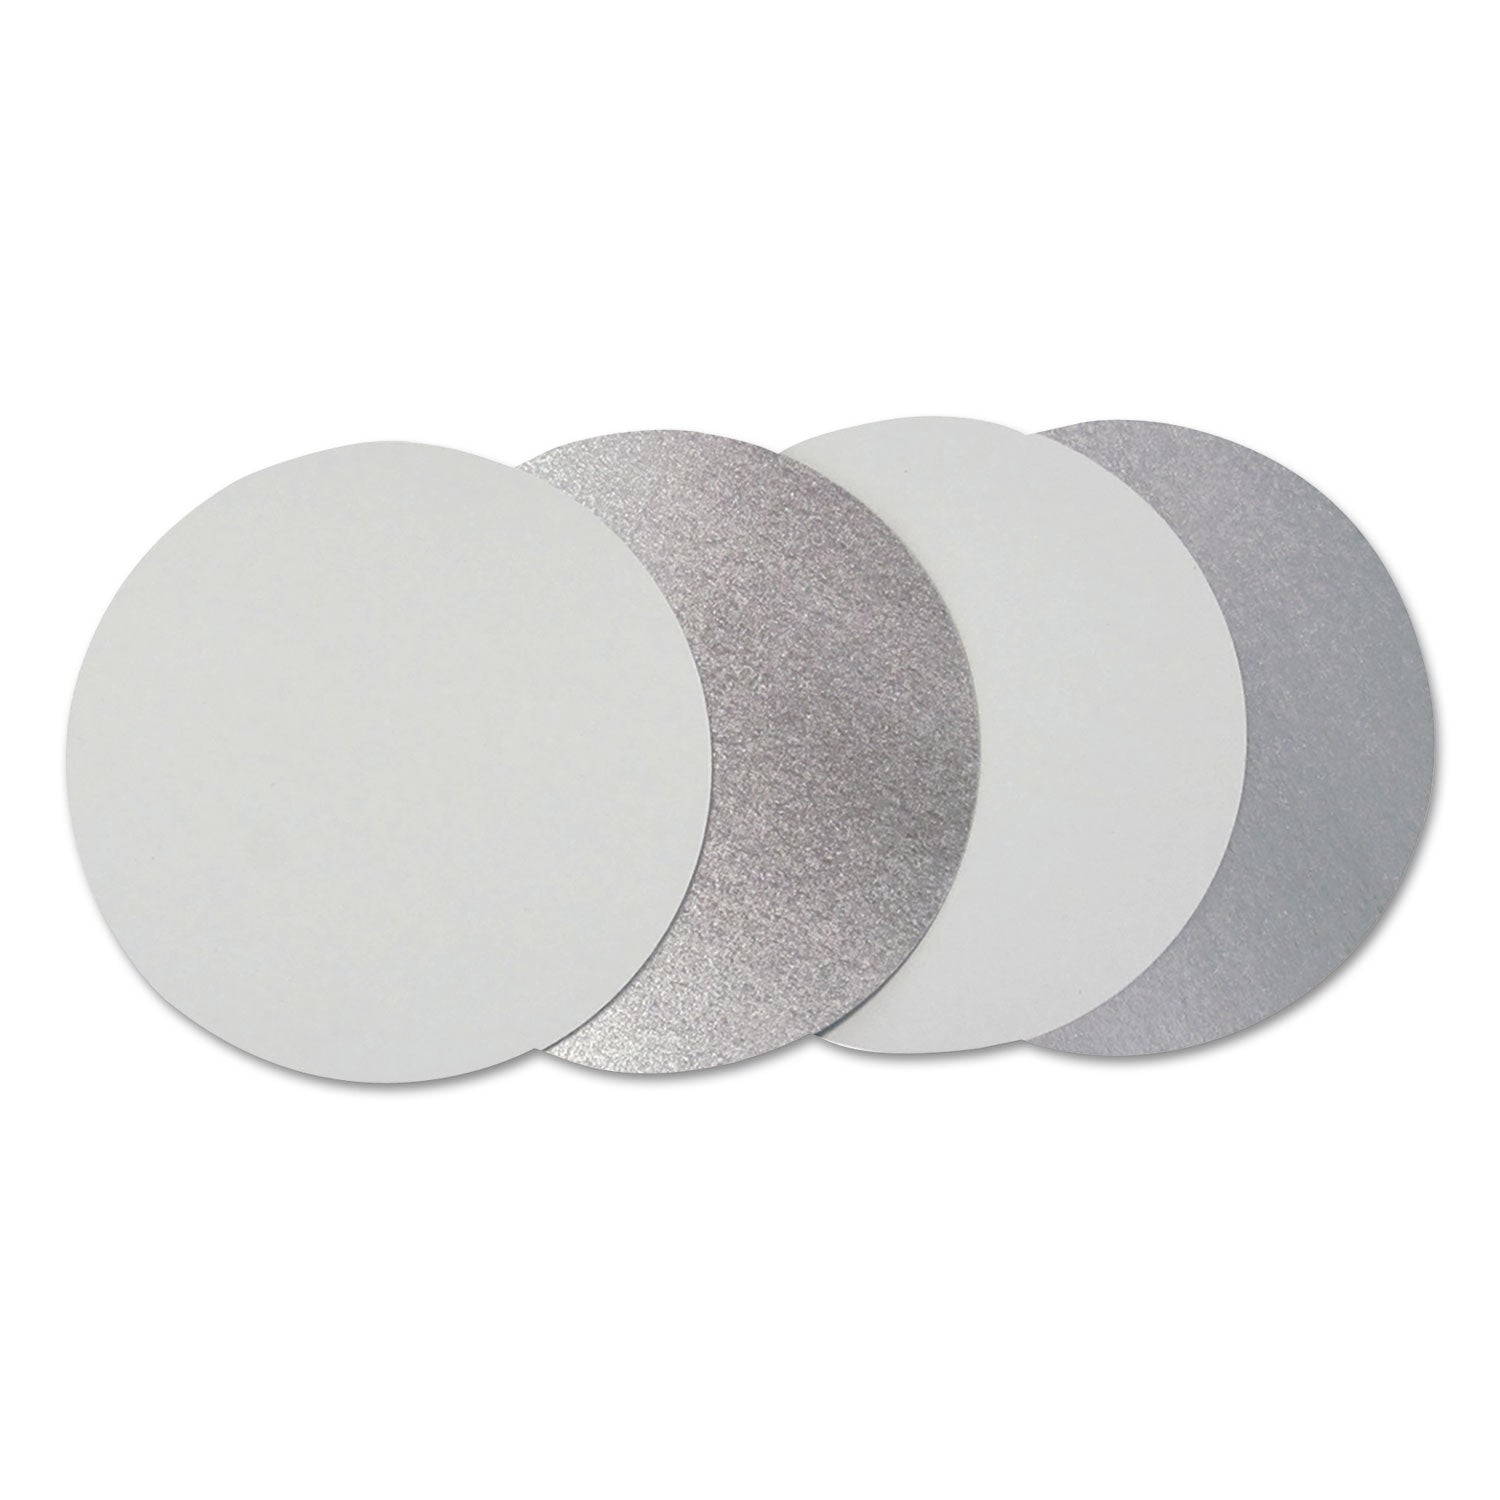 flat-board-lids-for-7-round-containers-silver-paper-500-carton_dpkl270500 - 1